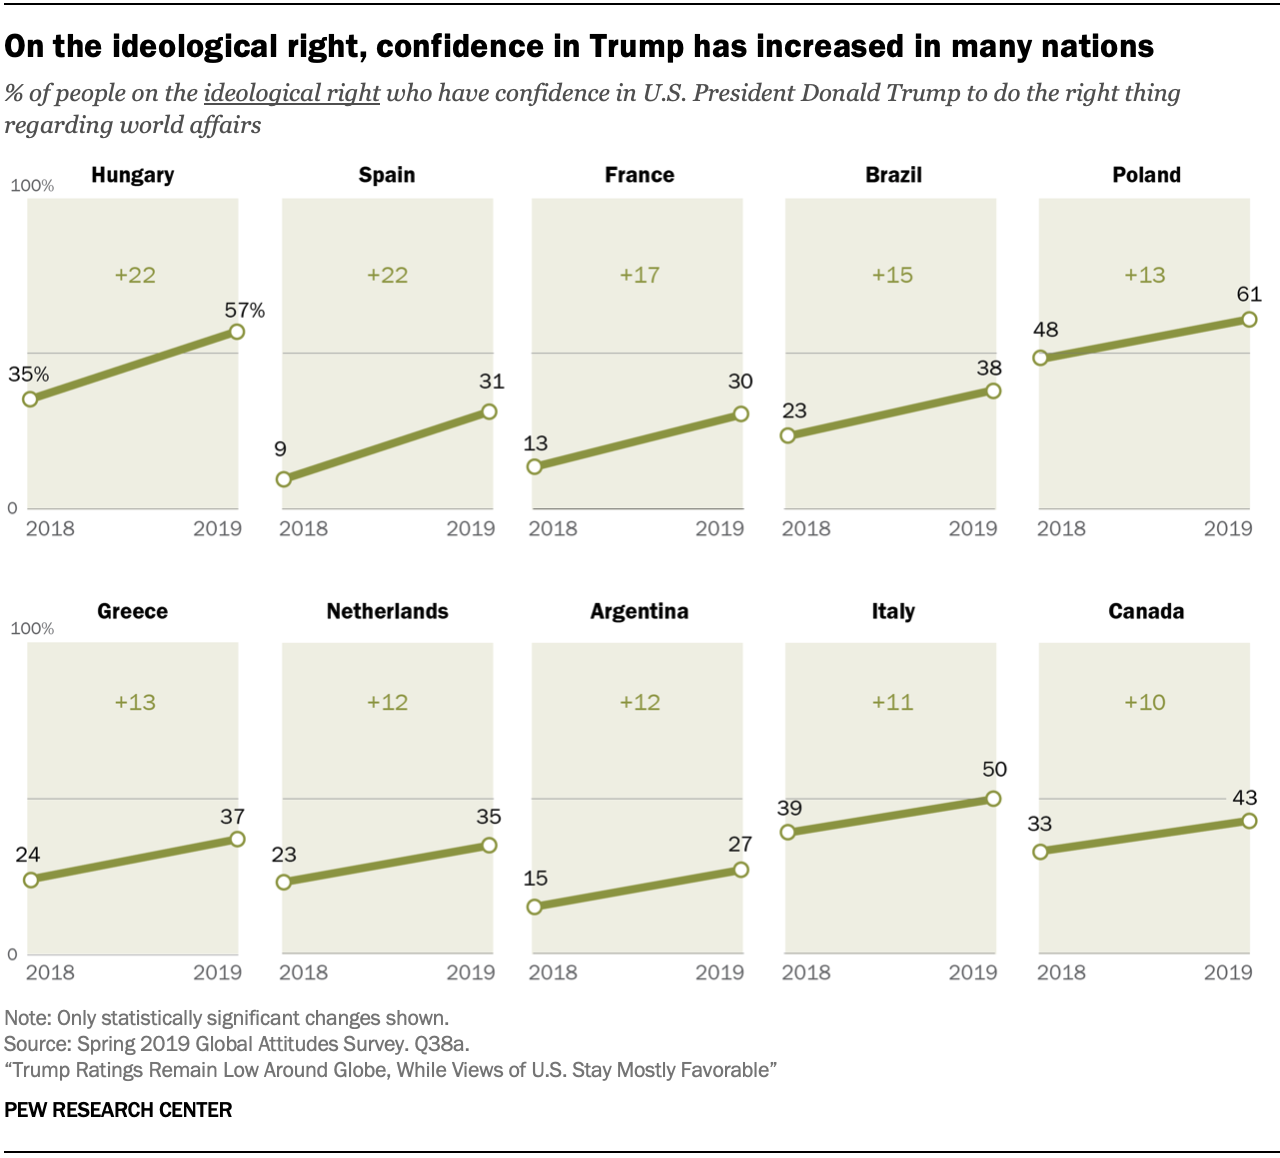 On the ideological right, confidence in Trump has increased in many nations